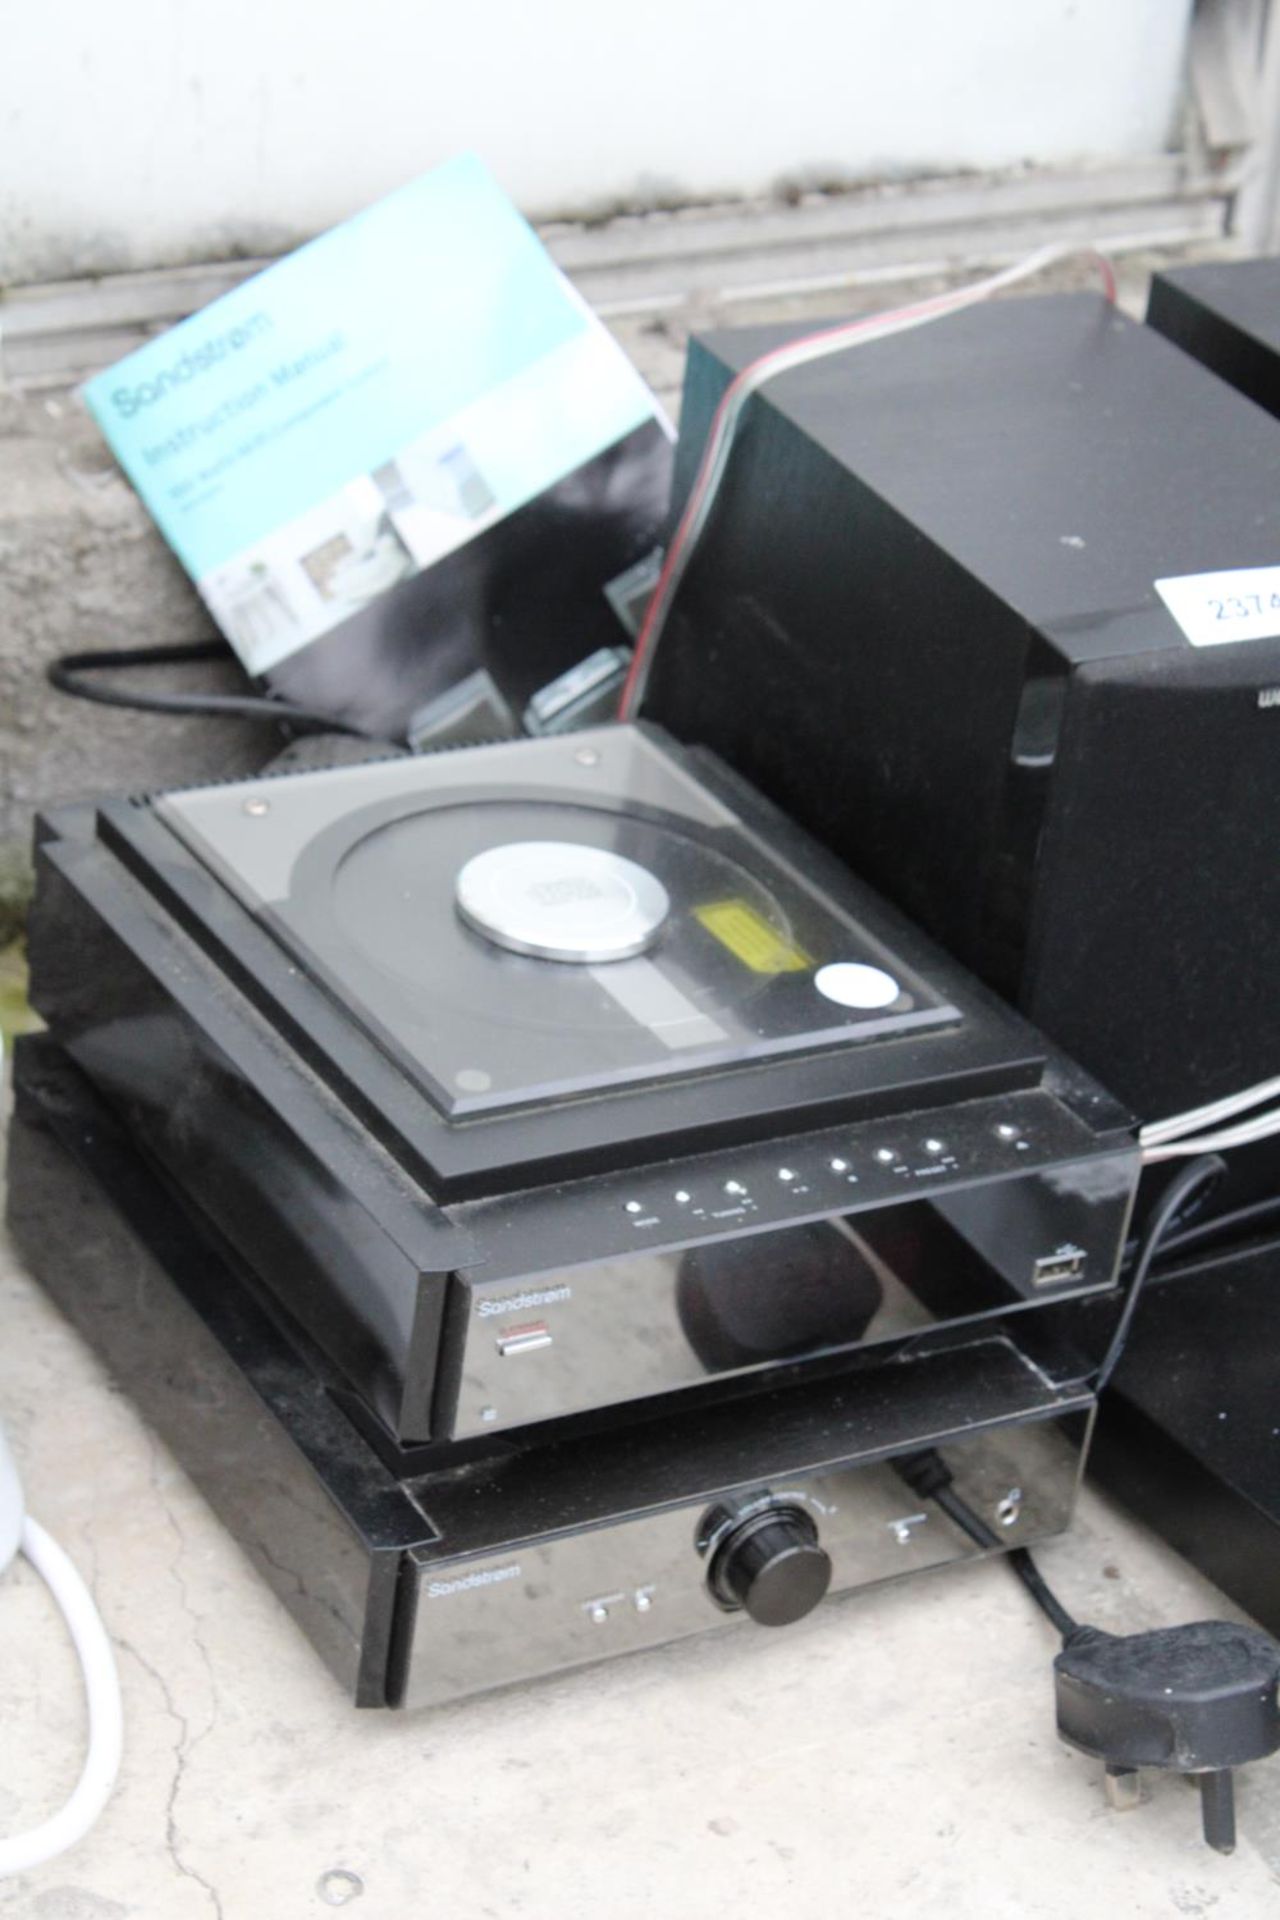 A SONY DVD PLAYER AND A SONDSTROM STEREO WITH TWO SPEAKERS - Image 2 of 2